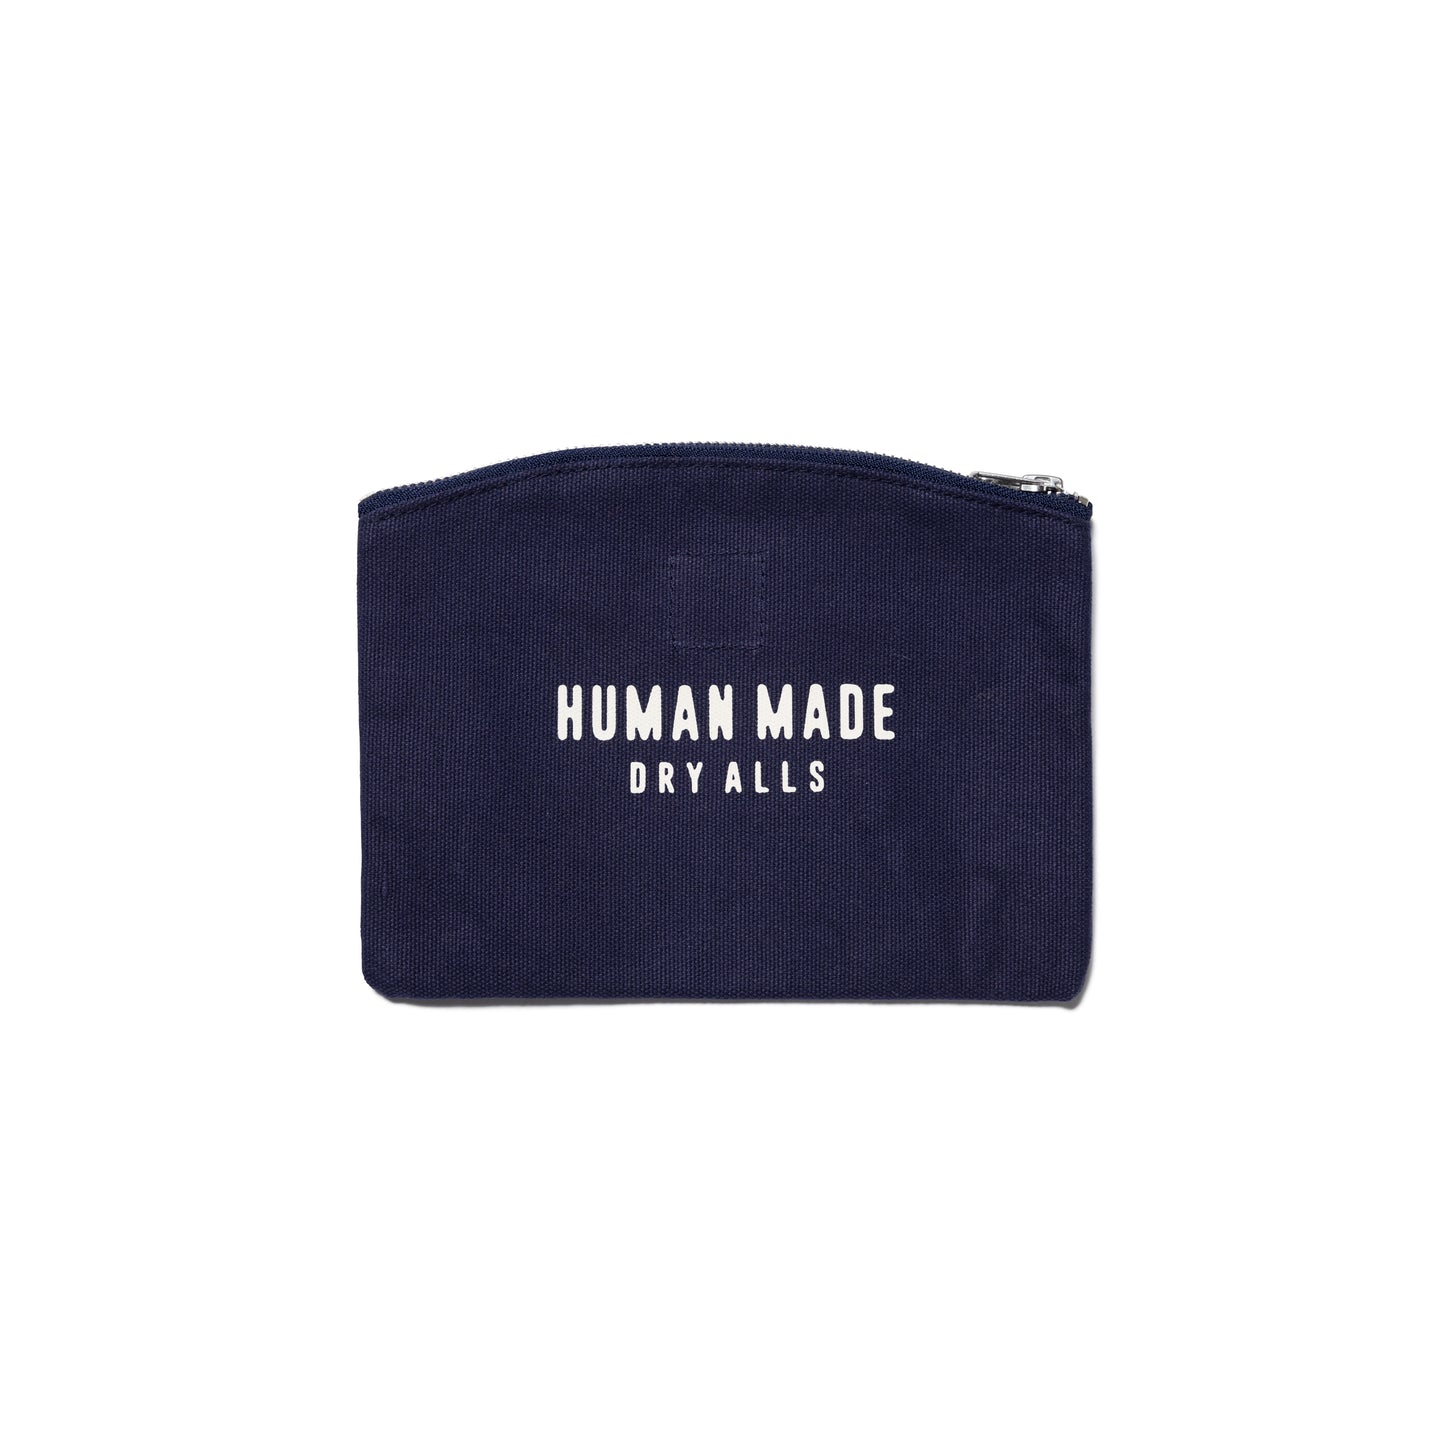 HUMAN MADE LEATHER POUCH – happyjagabee store